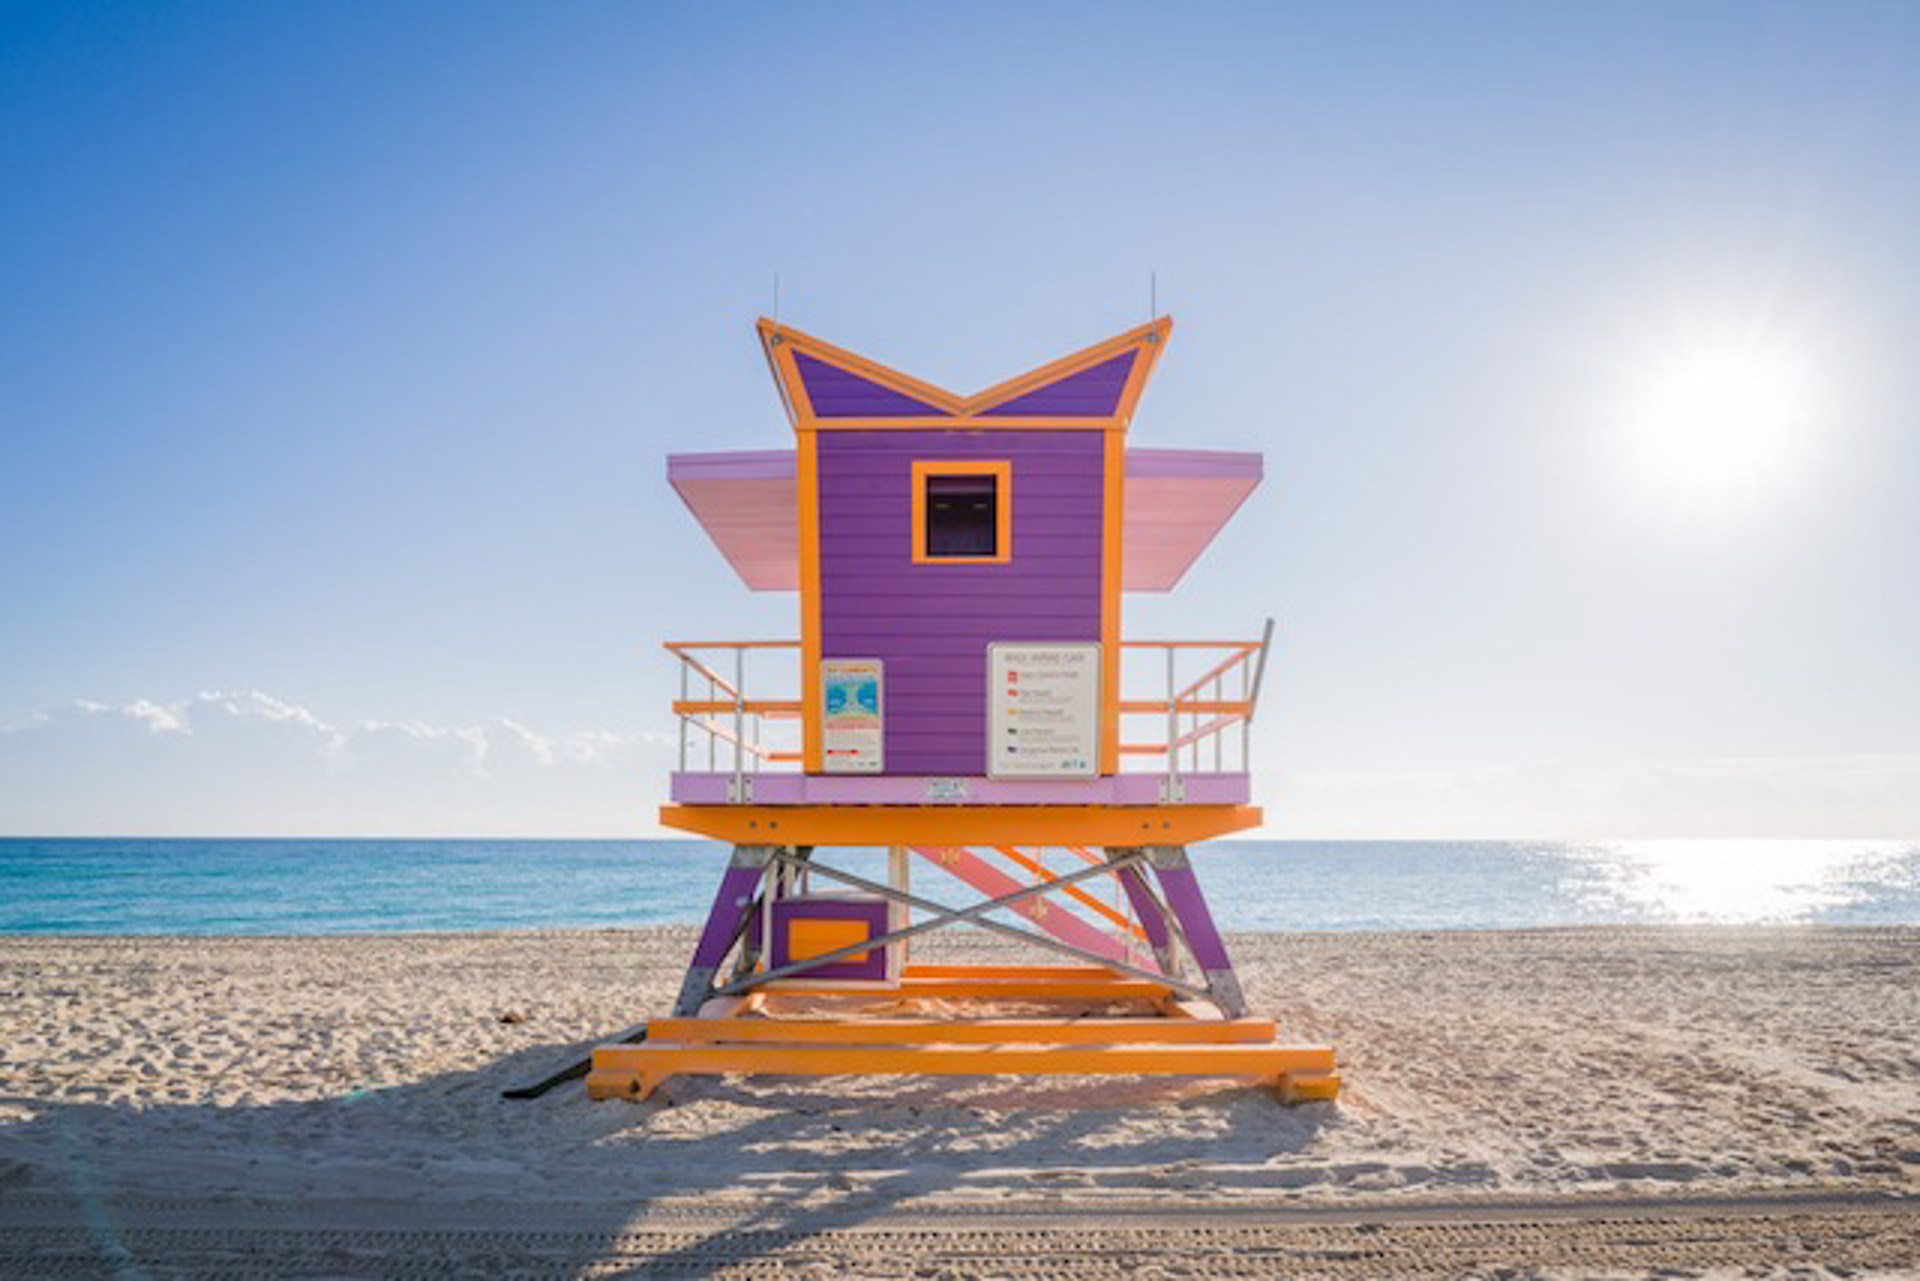 64th Street Lifeguard Stand, Rear View by Peter Mendelson